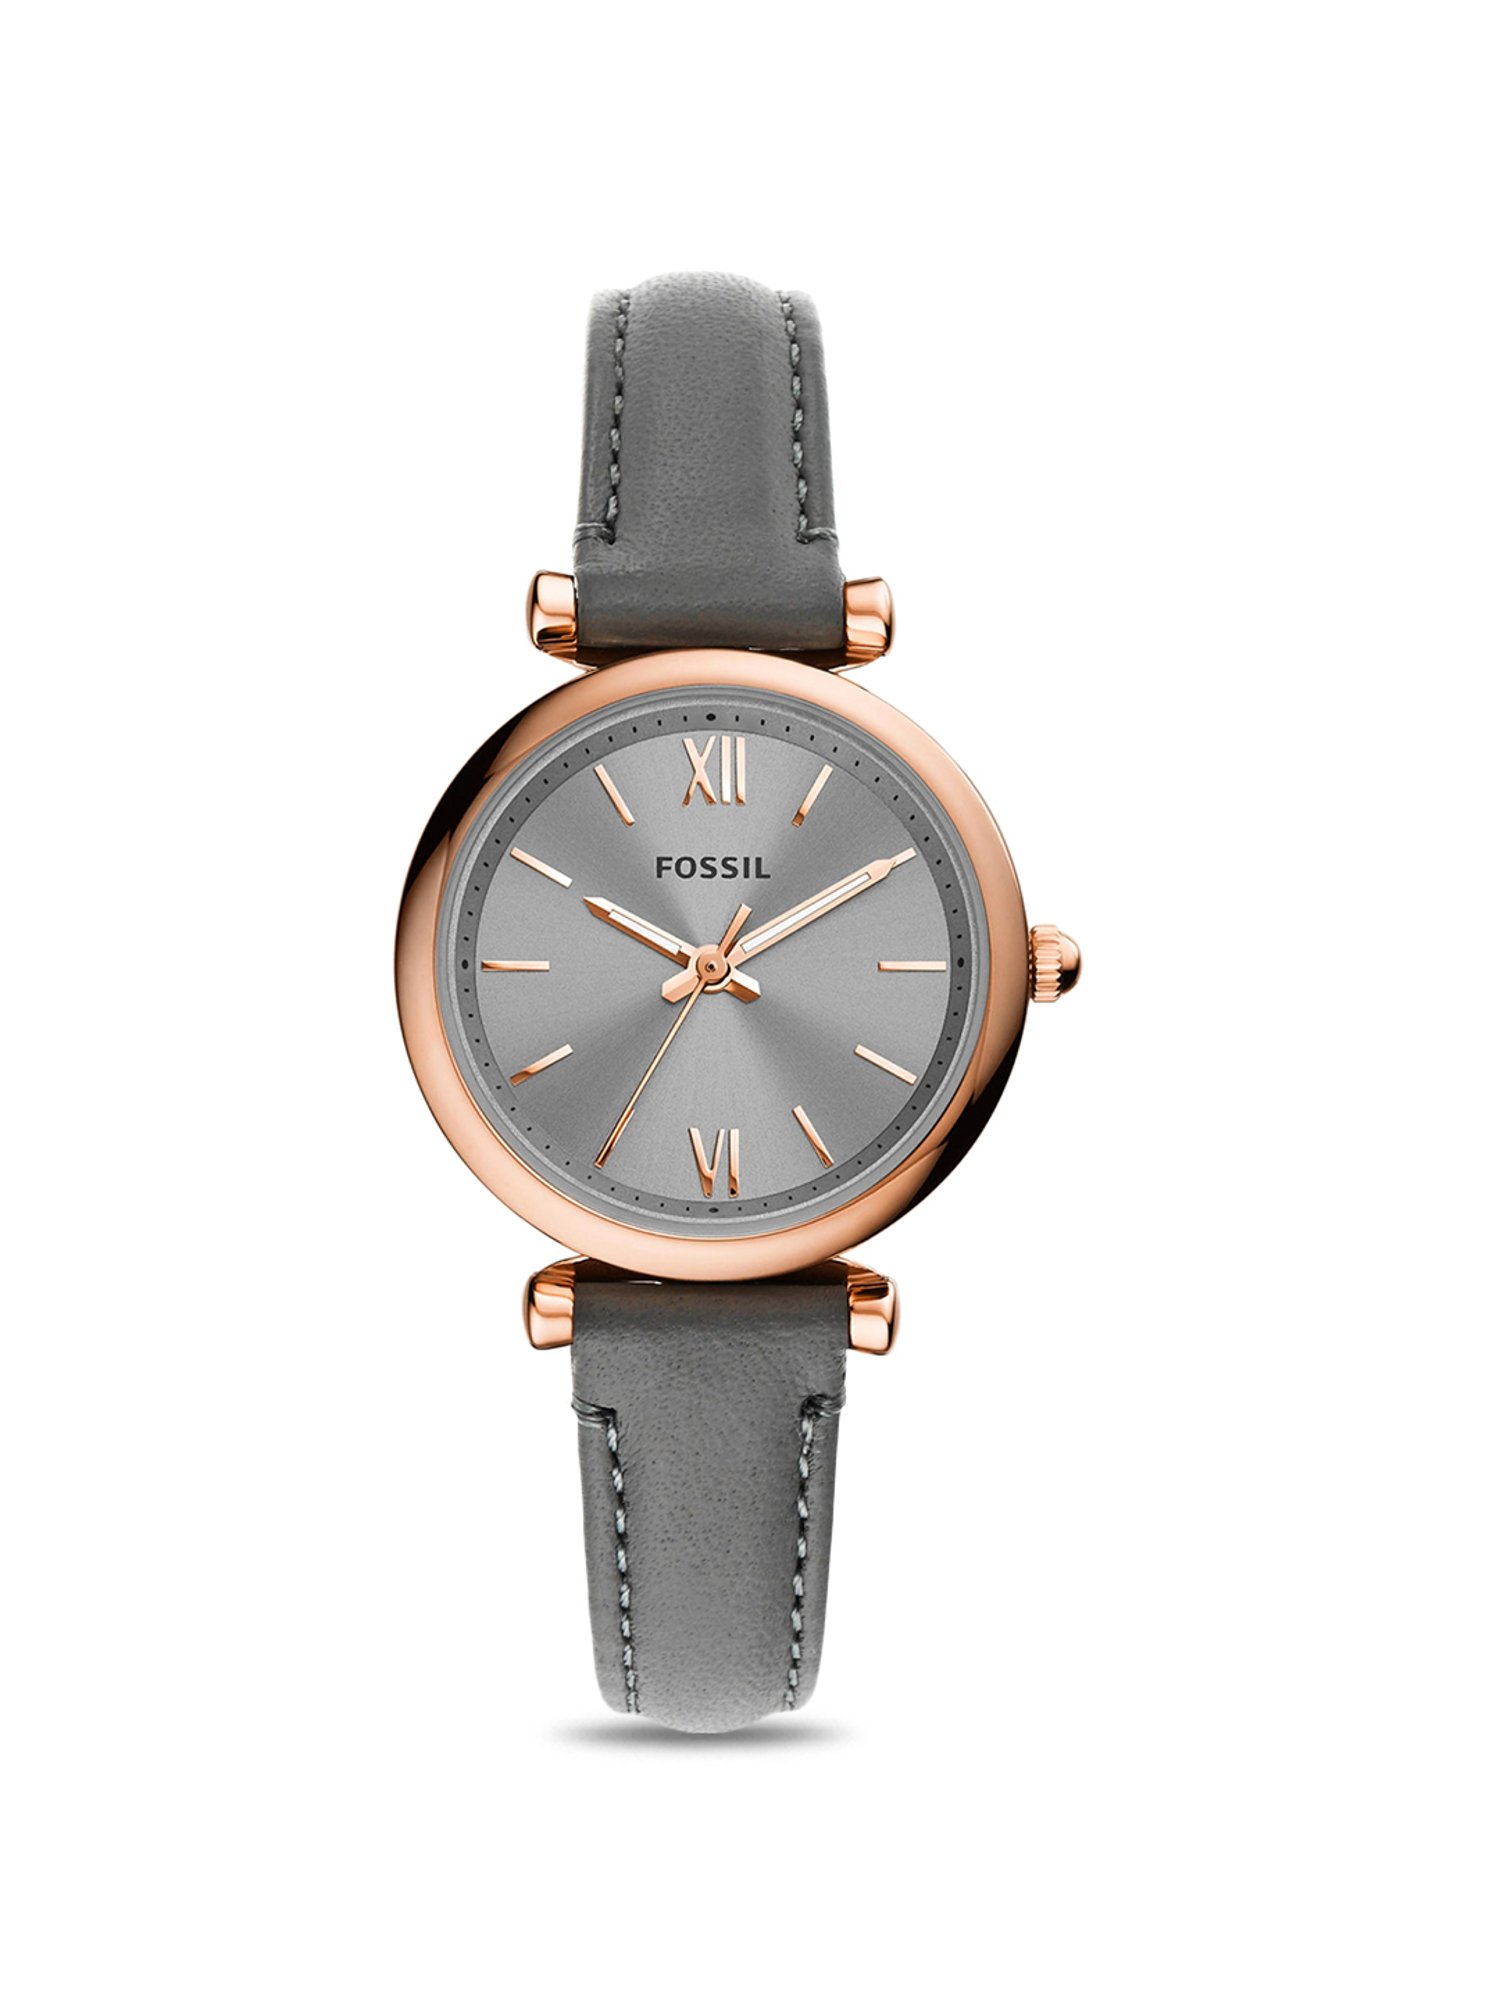 Buy Fossil ES5068 Carlie Mini Analog Watch for Women at Best